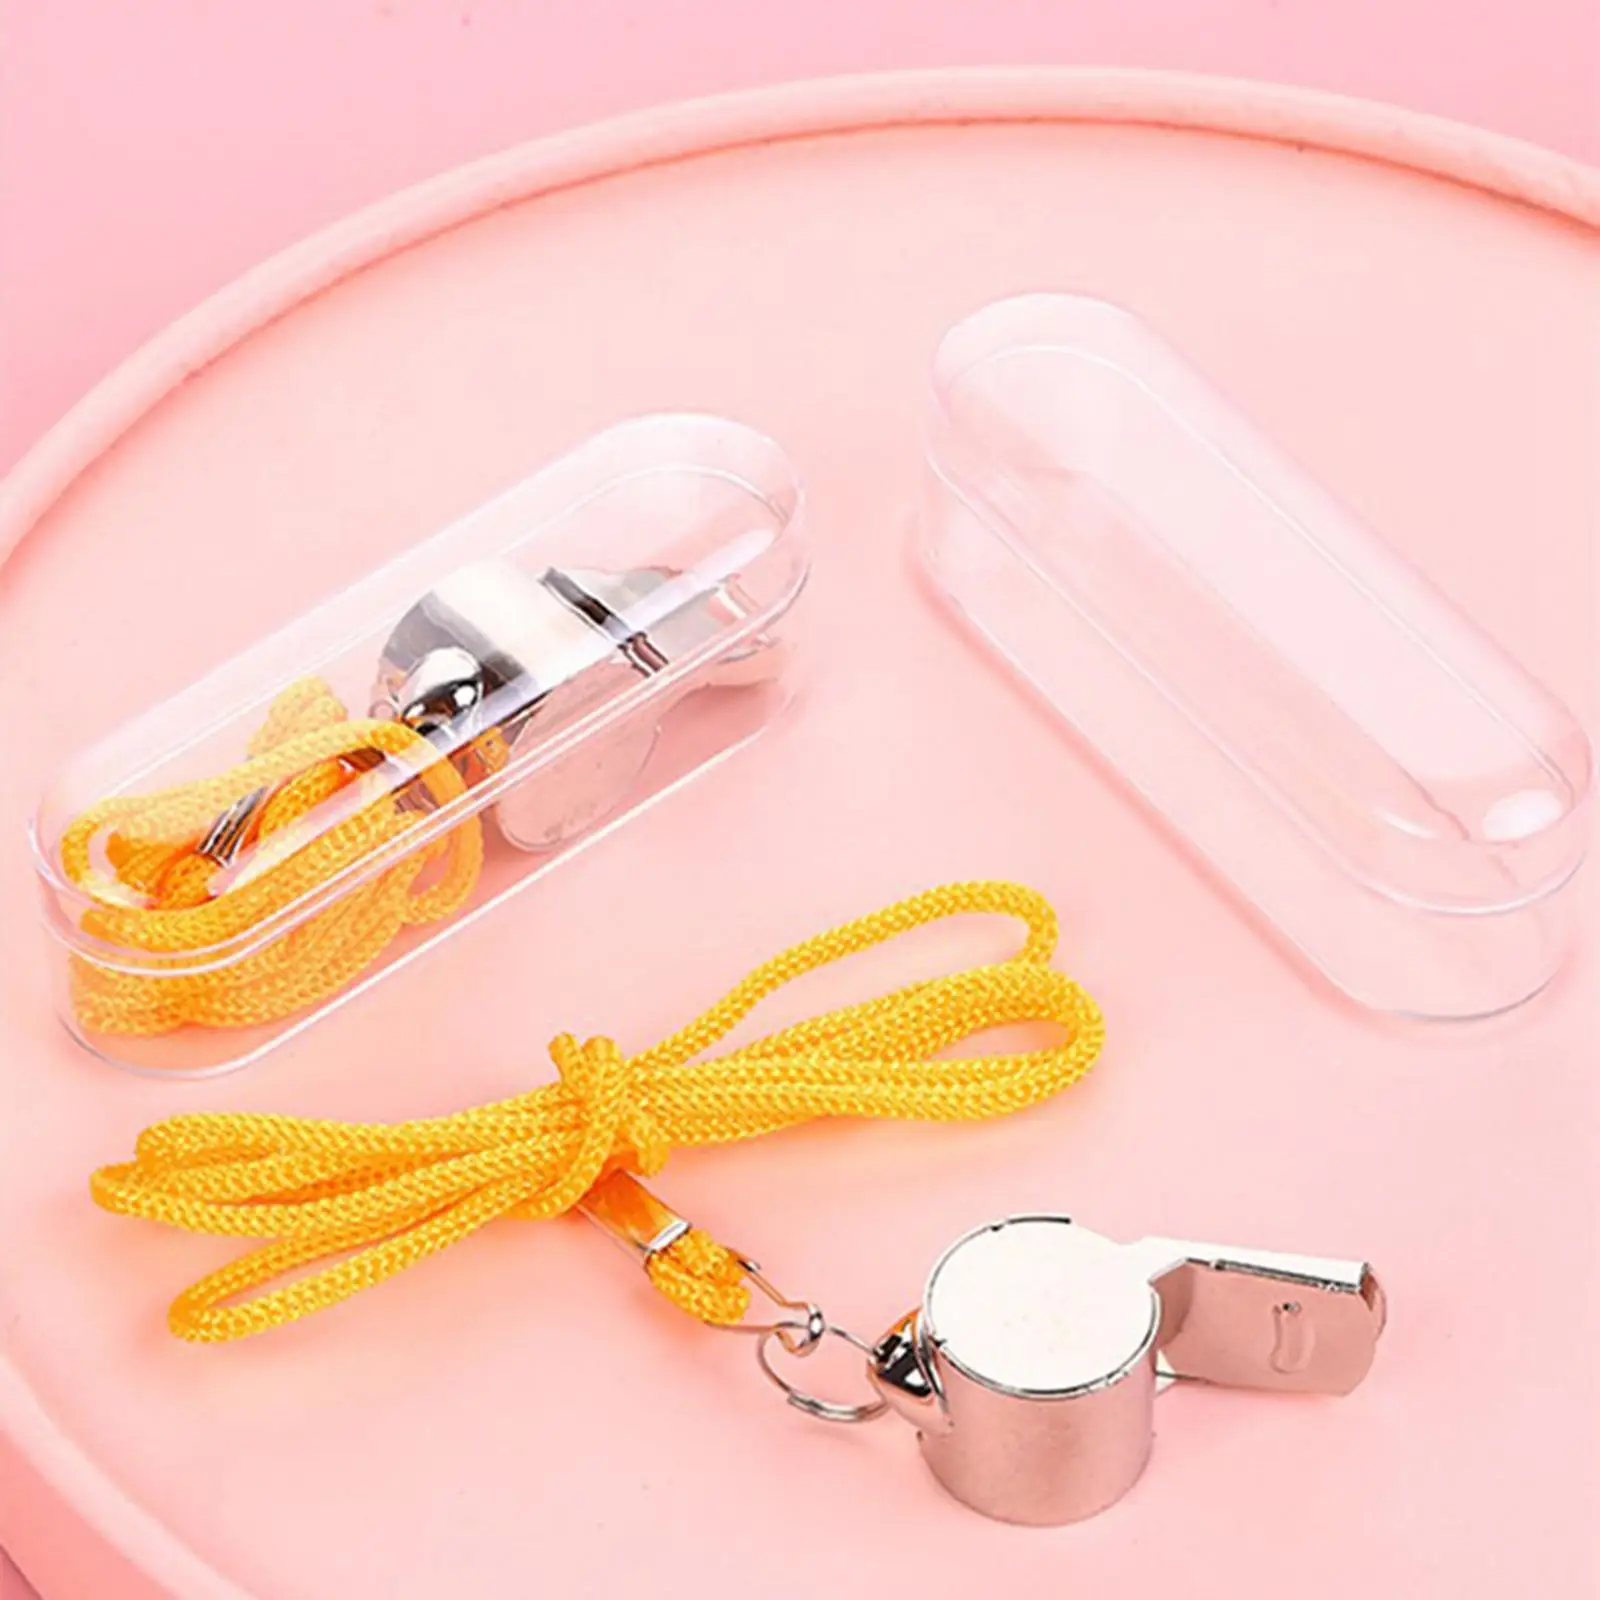 

Stainless Steel Sports Whistles Loud Crisp Sound Referee Whistle for Basketball Football Soccer Volleyball Training